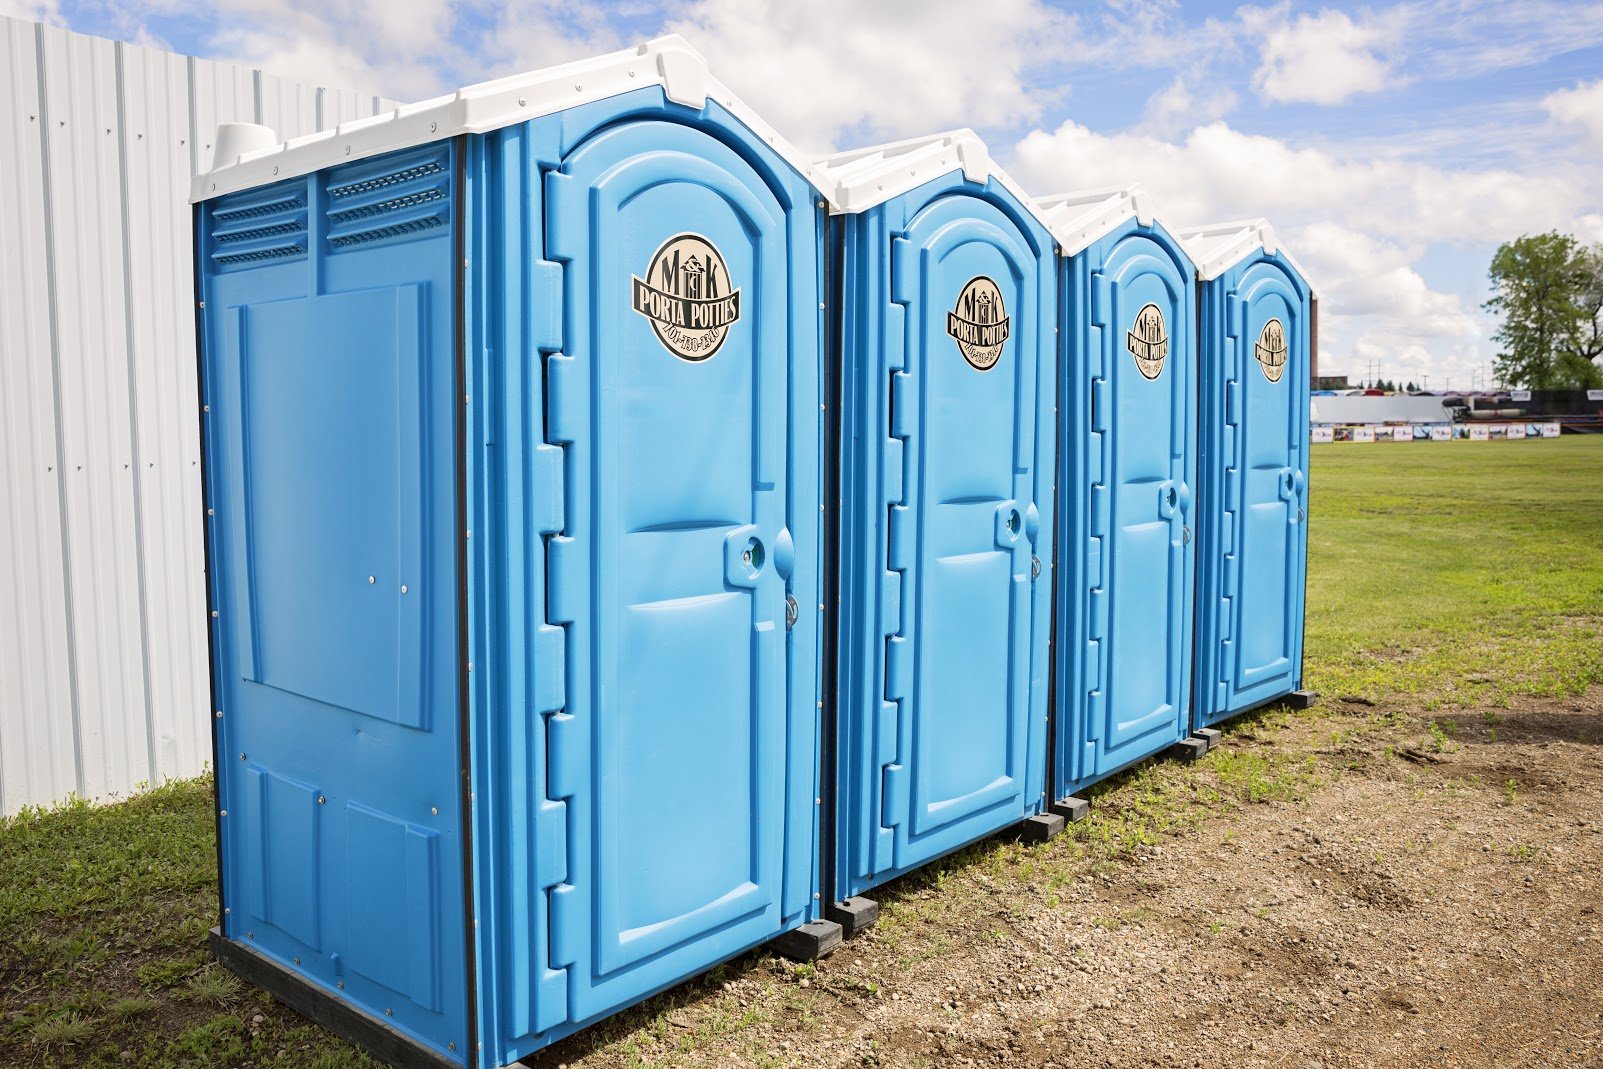 How Much It Cost To Rent A Porta Potty